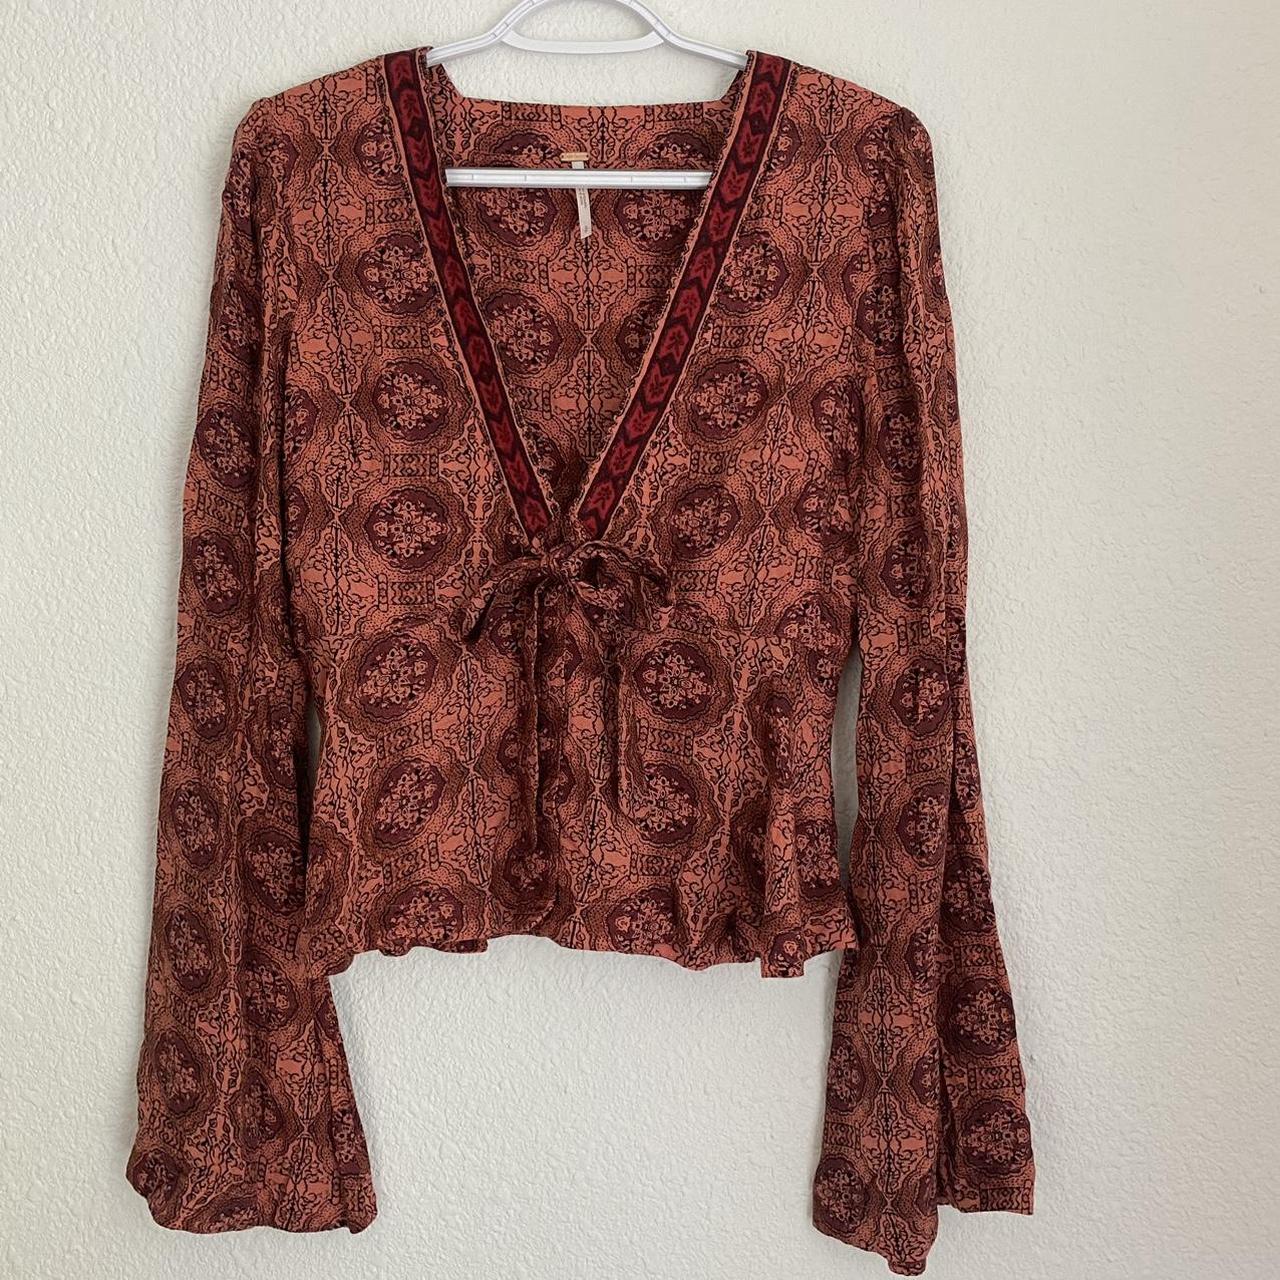 Free People Women's Pink and Burgundy Blouse